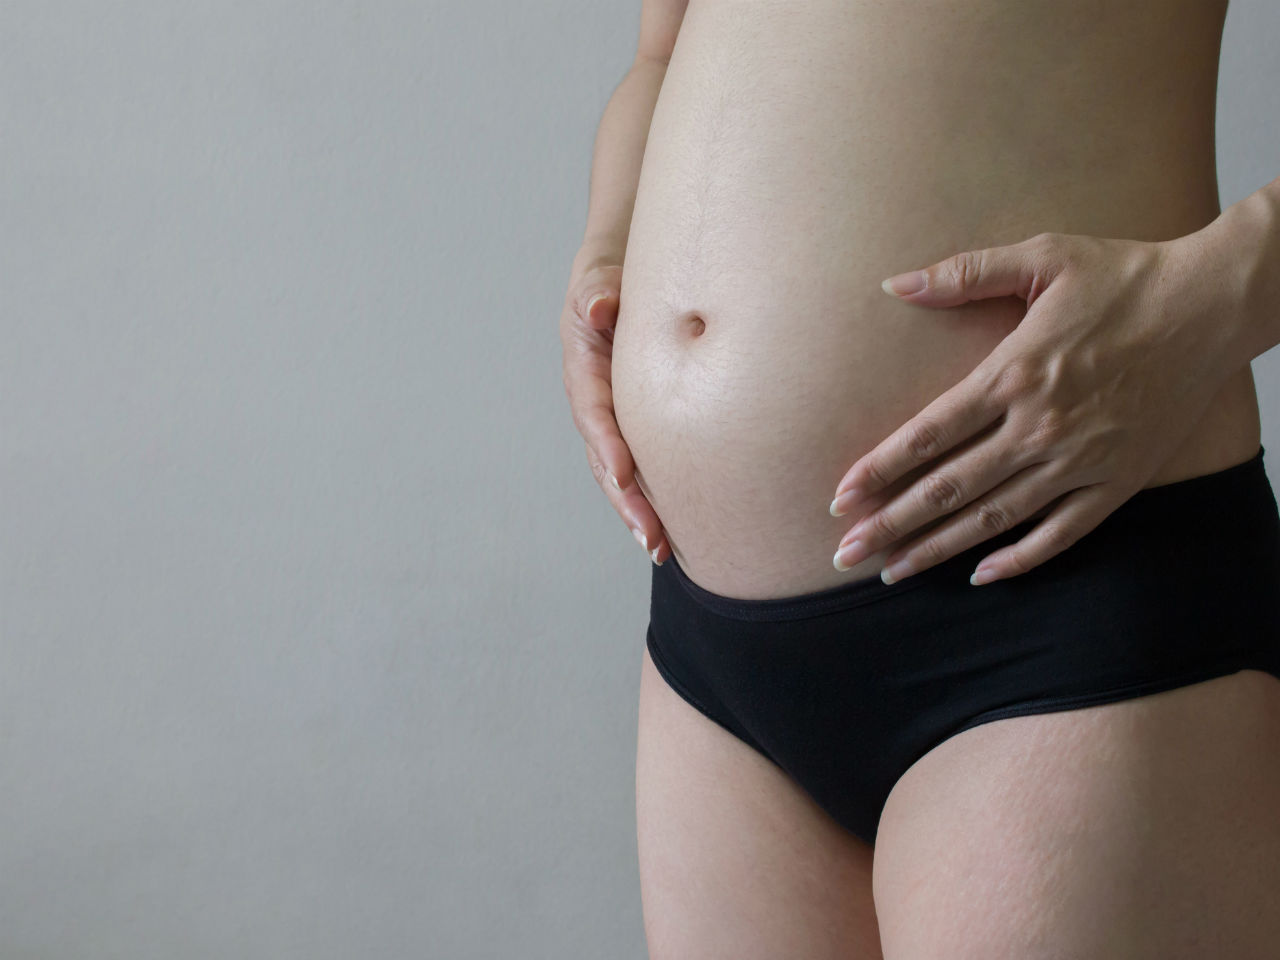 Pregnant woman holding her bare belly